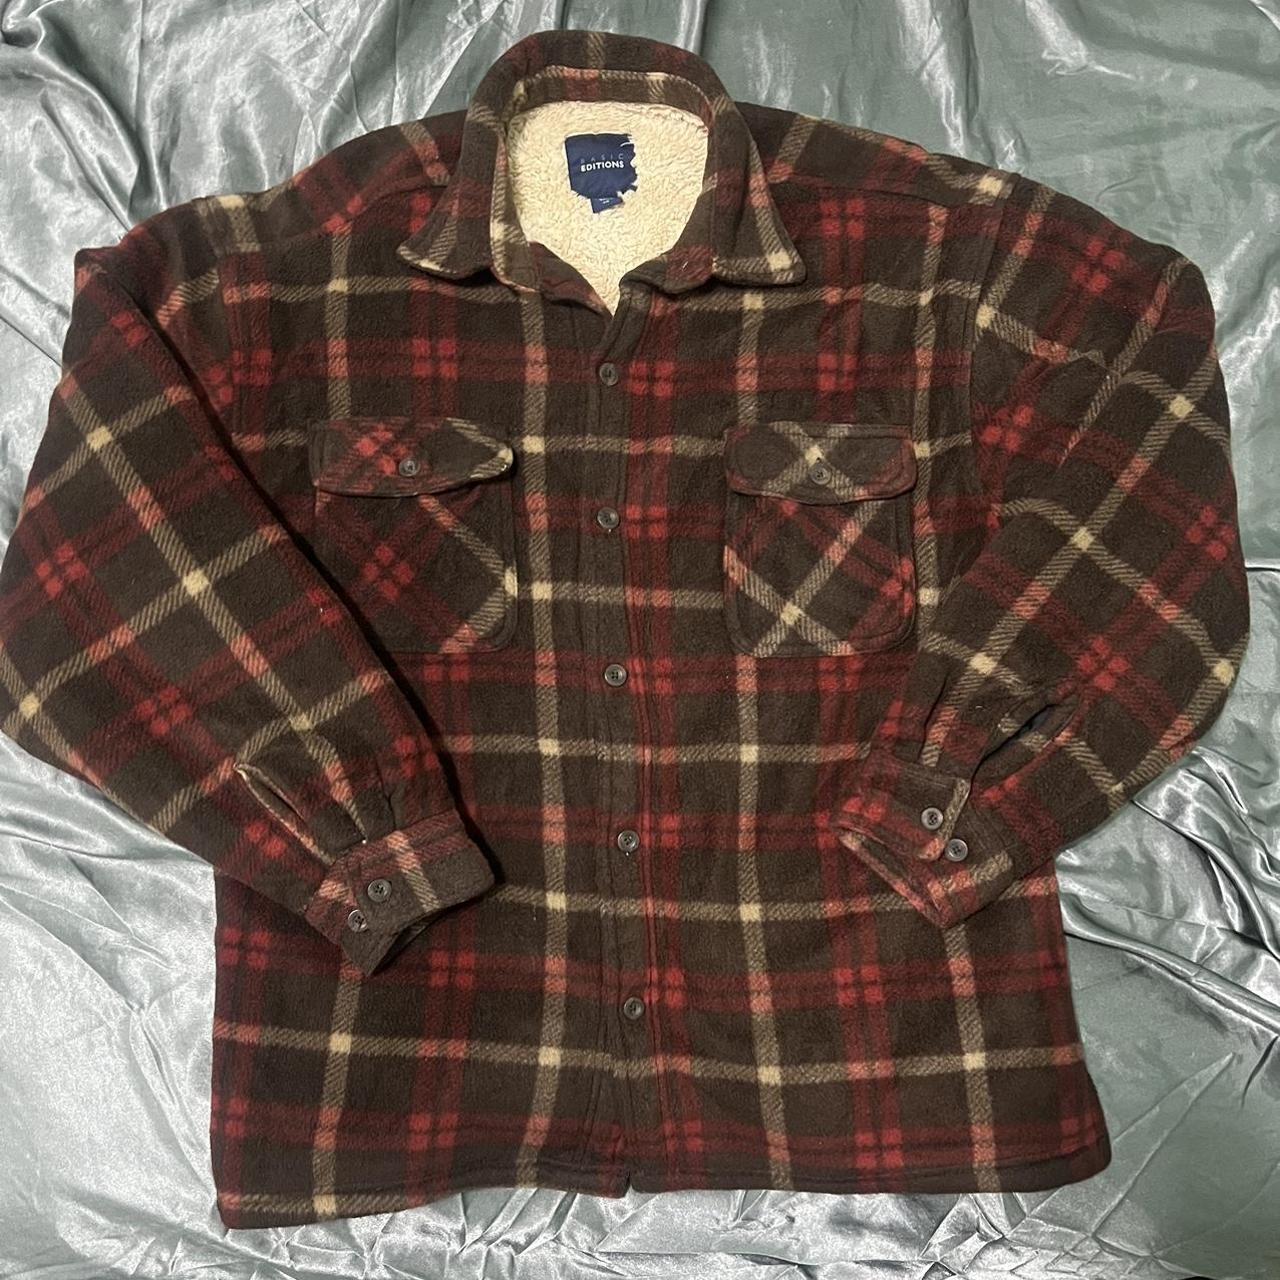 Basic Editions Men's Red and Brown Shirt | Depop